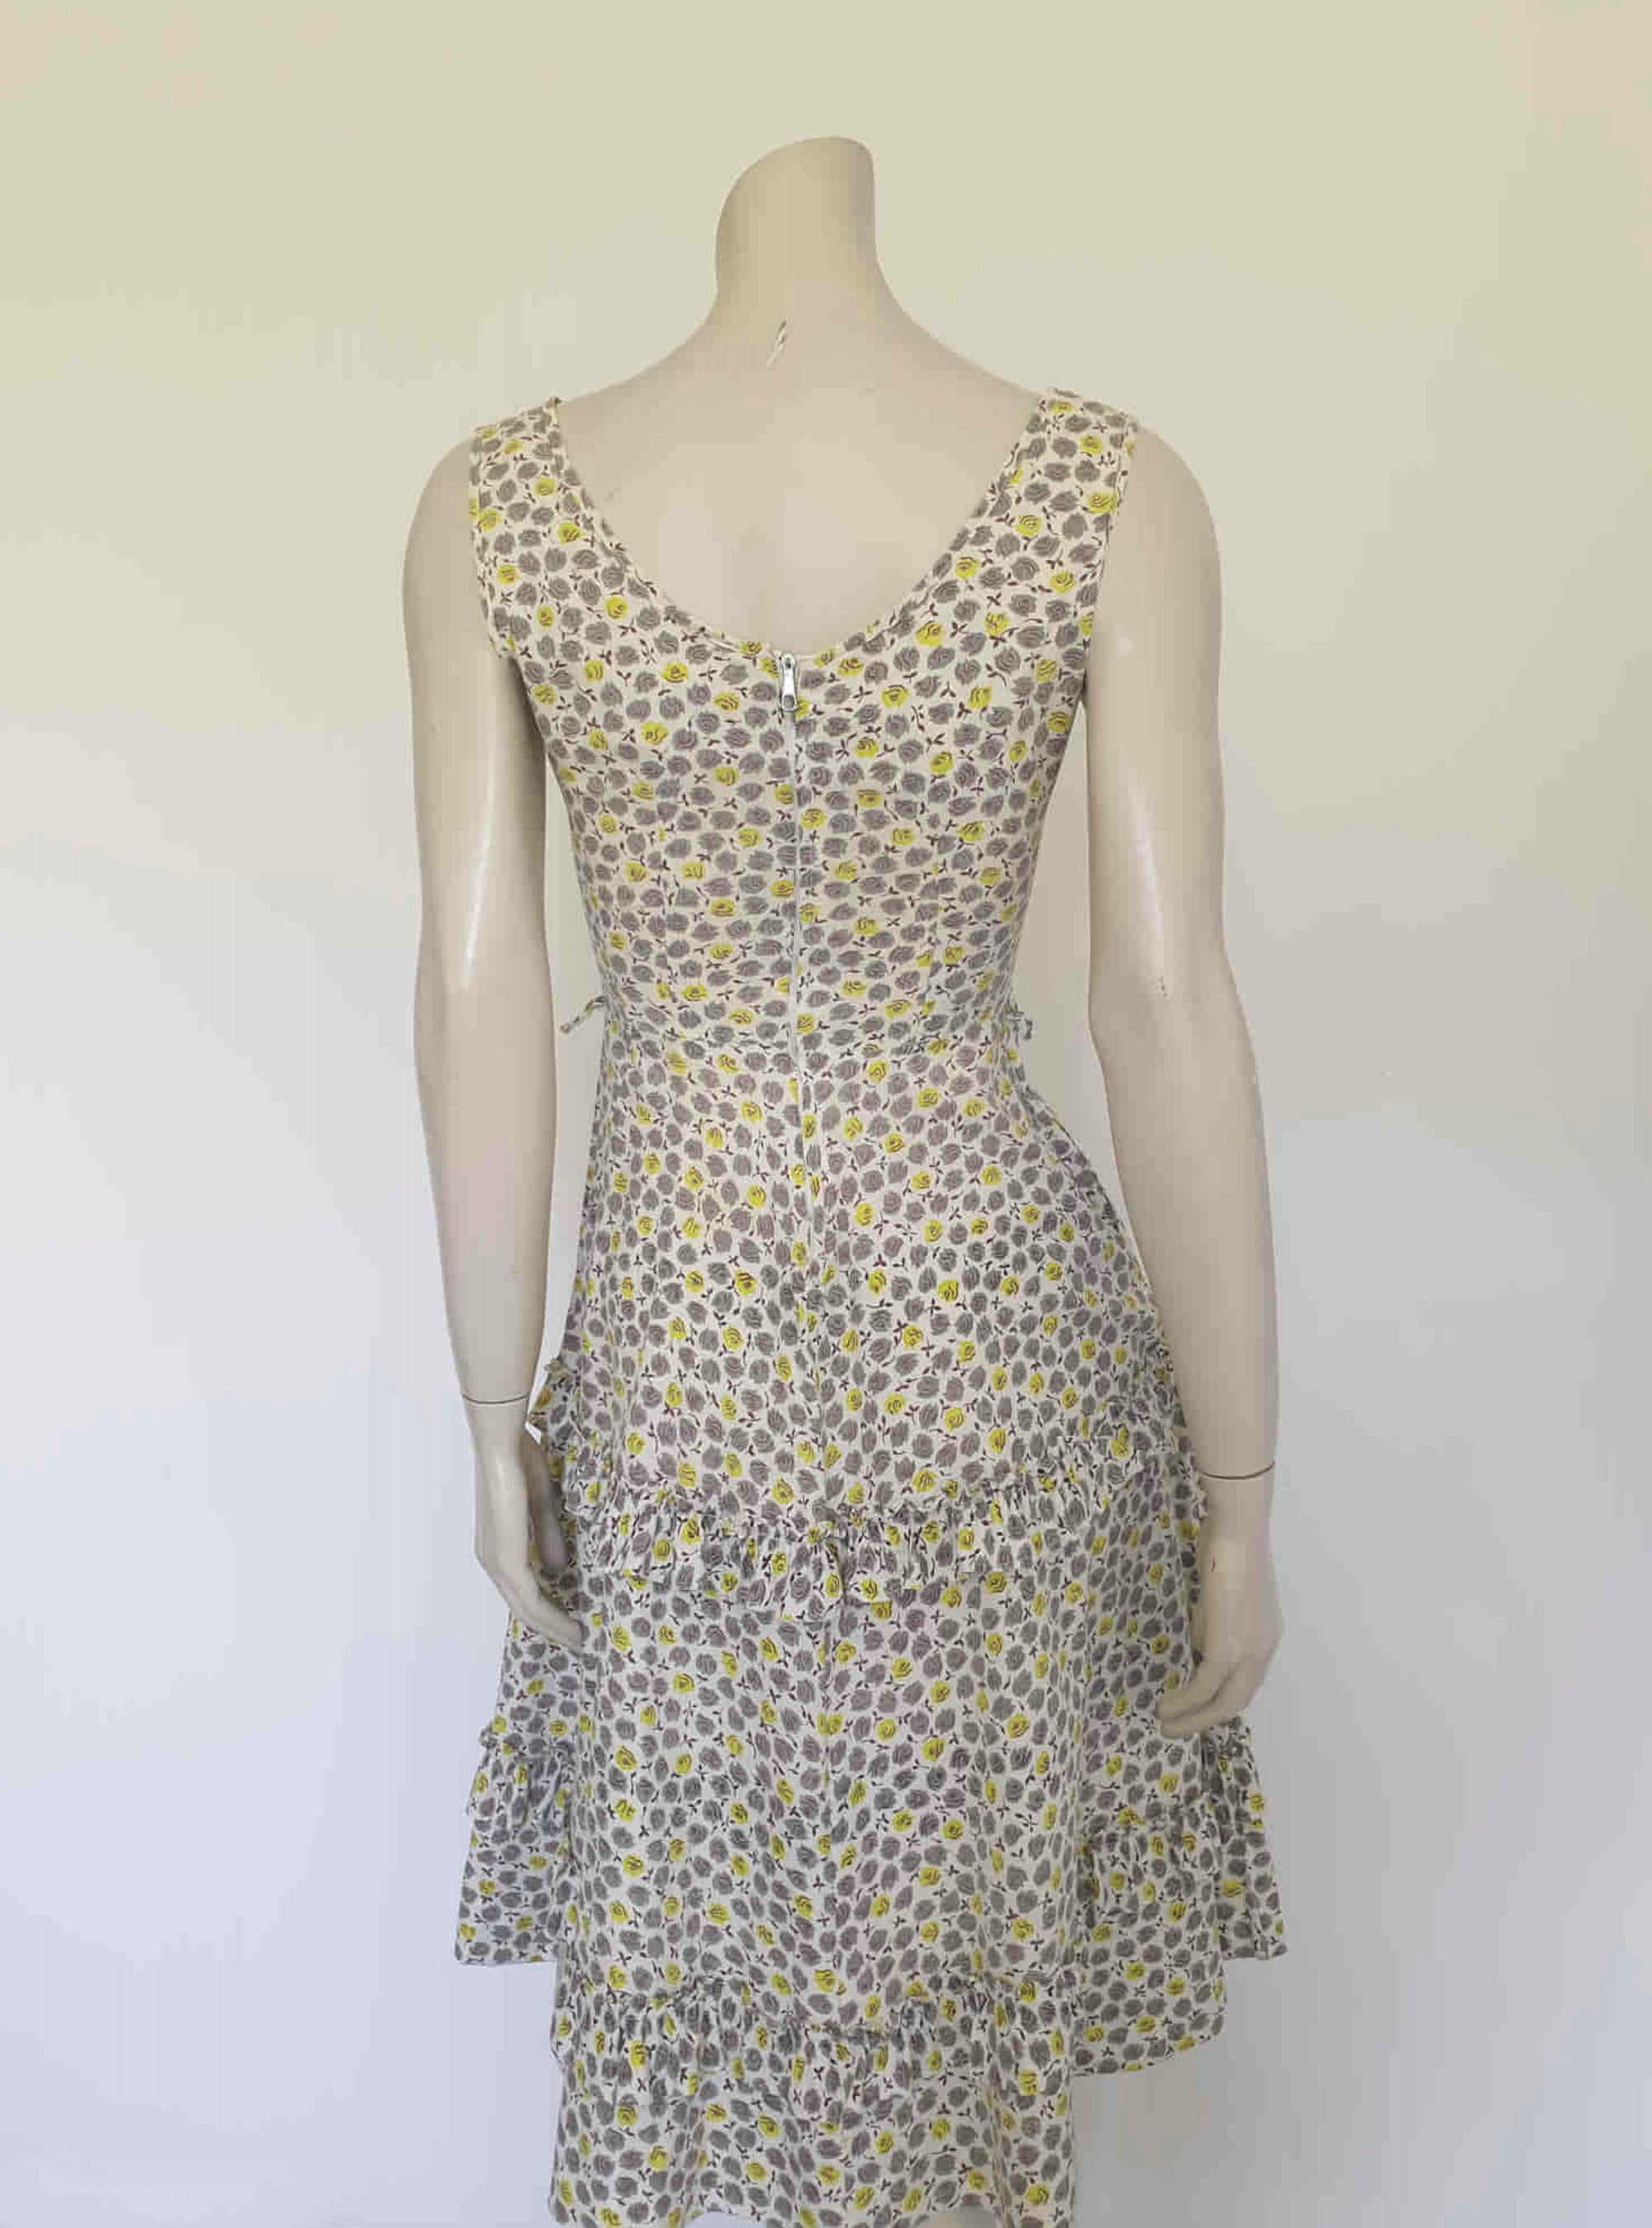 1950s vintage cotton day dress grey and green floral